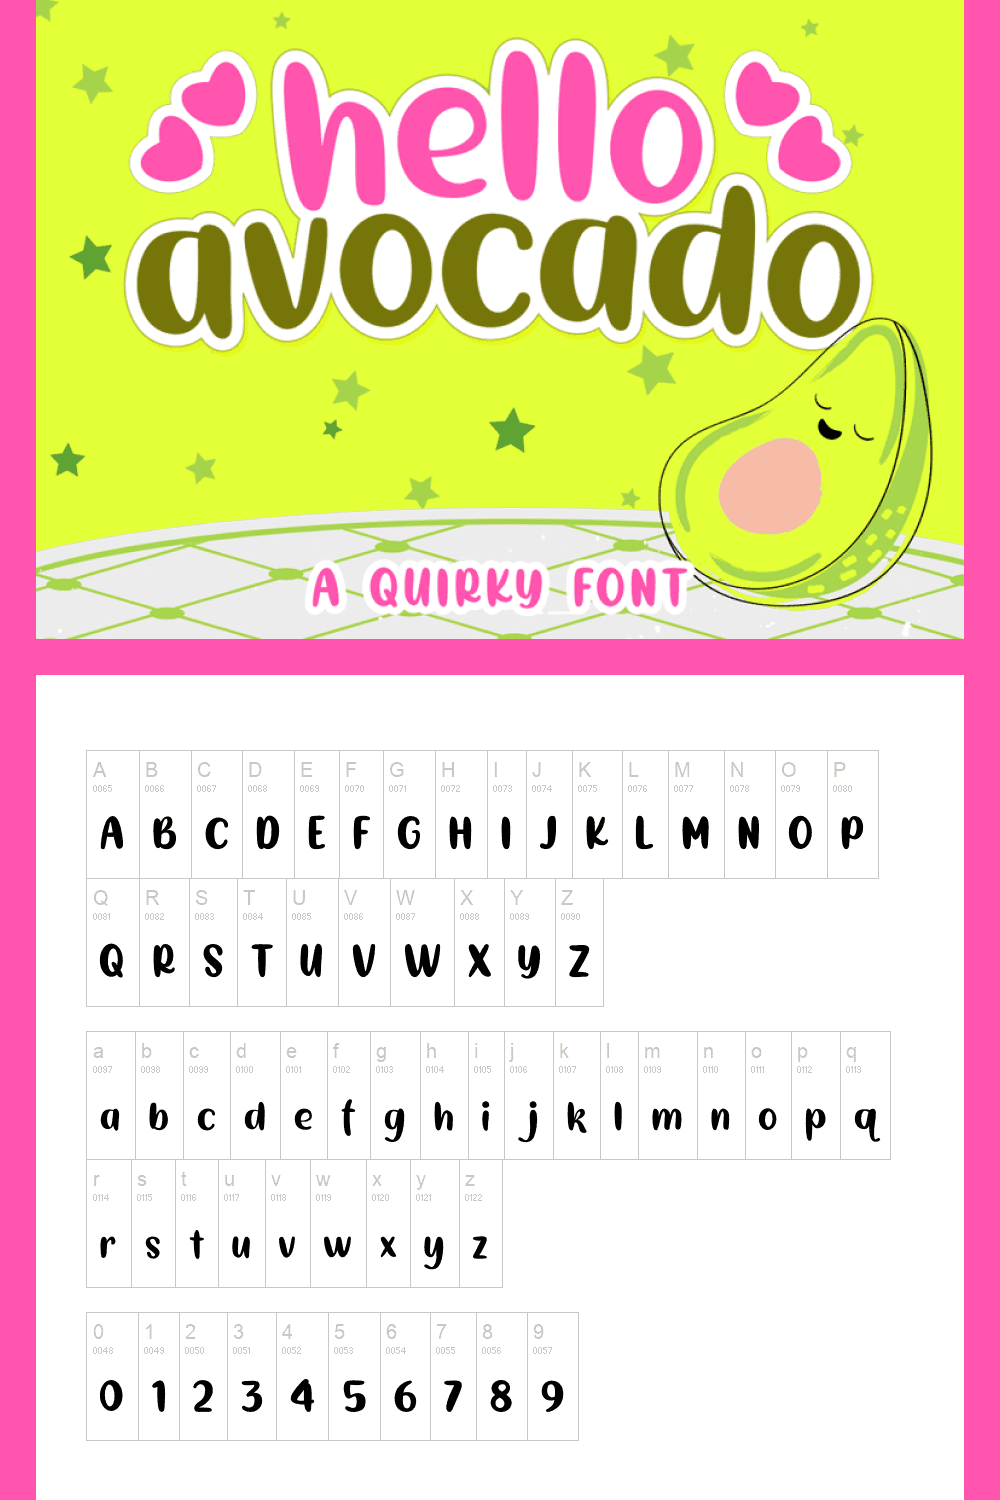 A fun and cartoonish font in very vibrant colors.